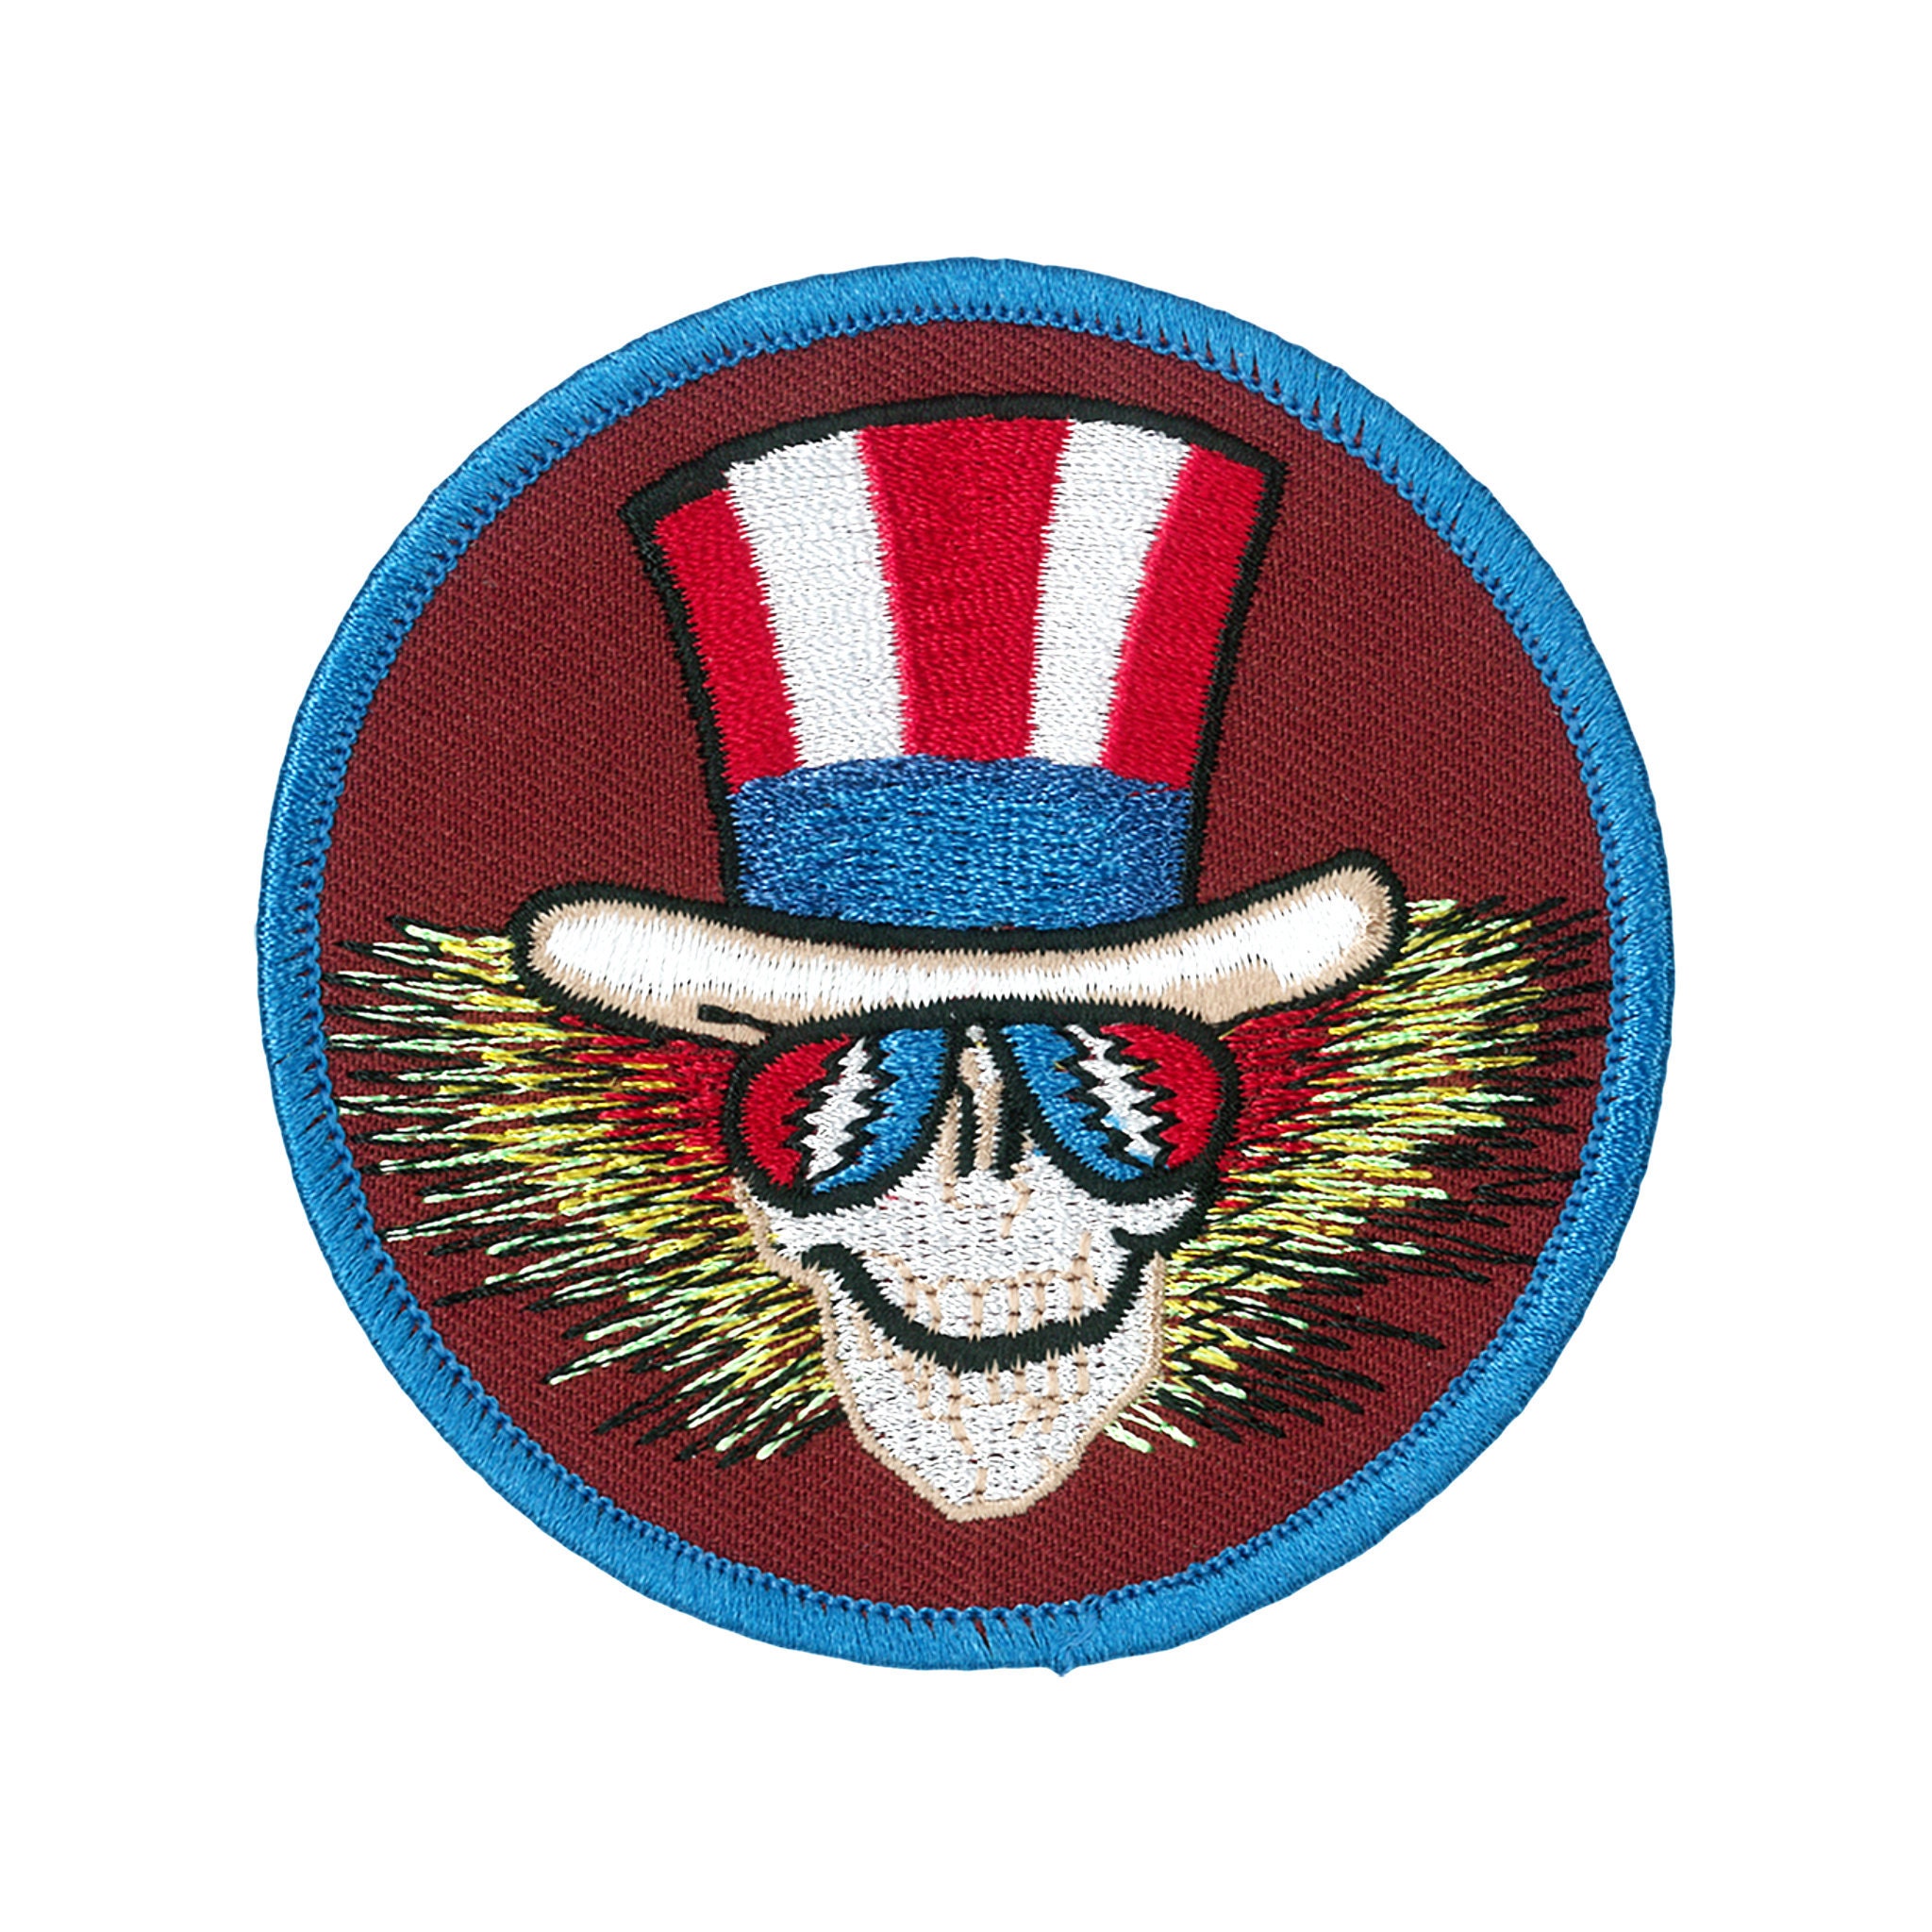 GRATEFUL DEAD DANCING SKELETONS WITH TOPHAT EMBROIDERED PATCH !